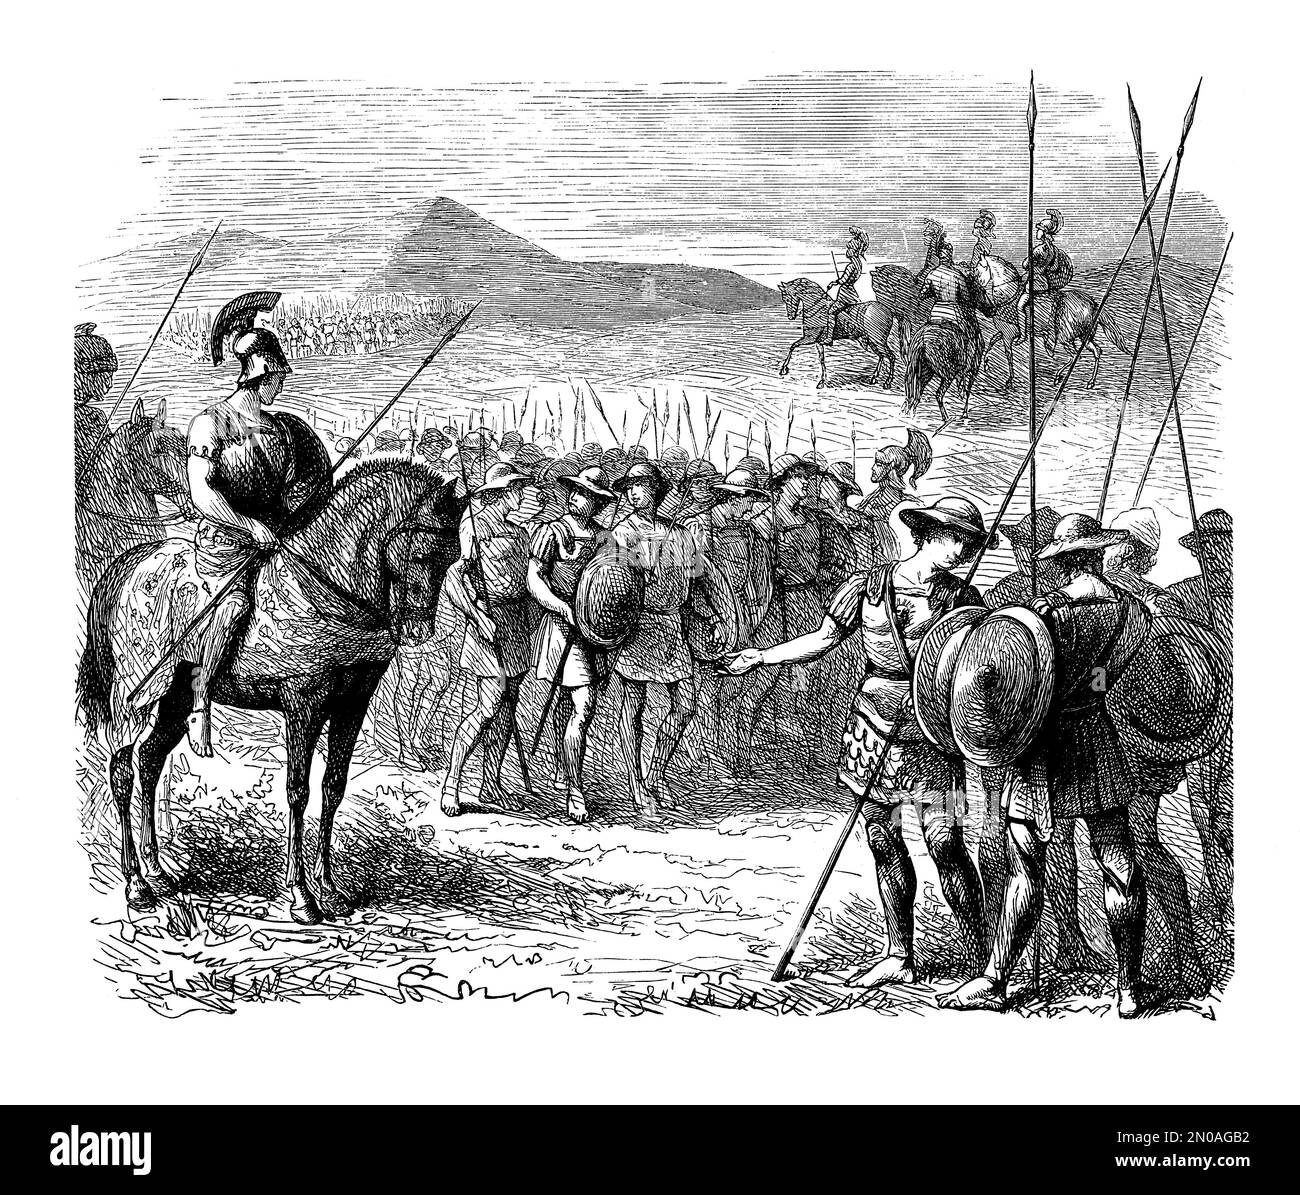 Antique 19th-century engraving of soldiers from Ancient Greece. From left to right: 1. Cavalryman from Ancient Thessaly; 2. Macedonian heavy infantry; Stock Photo